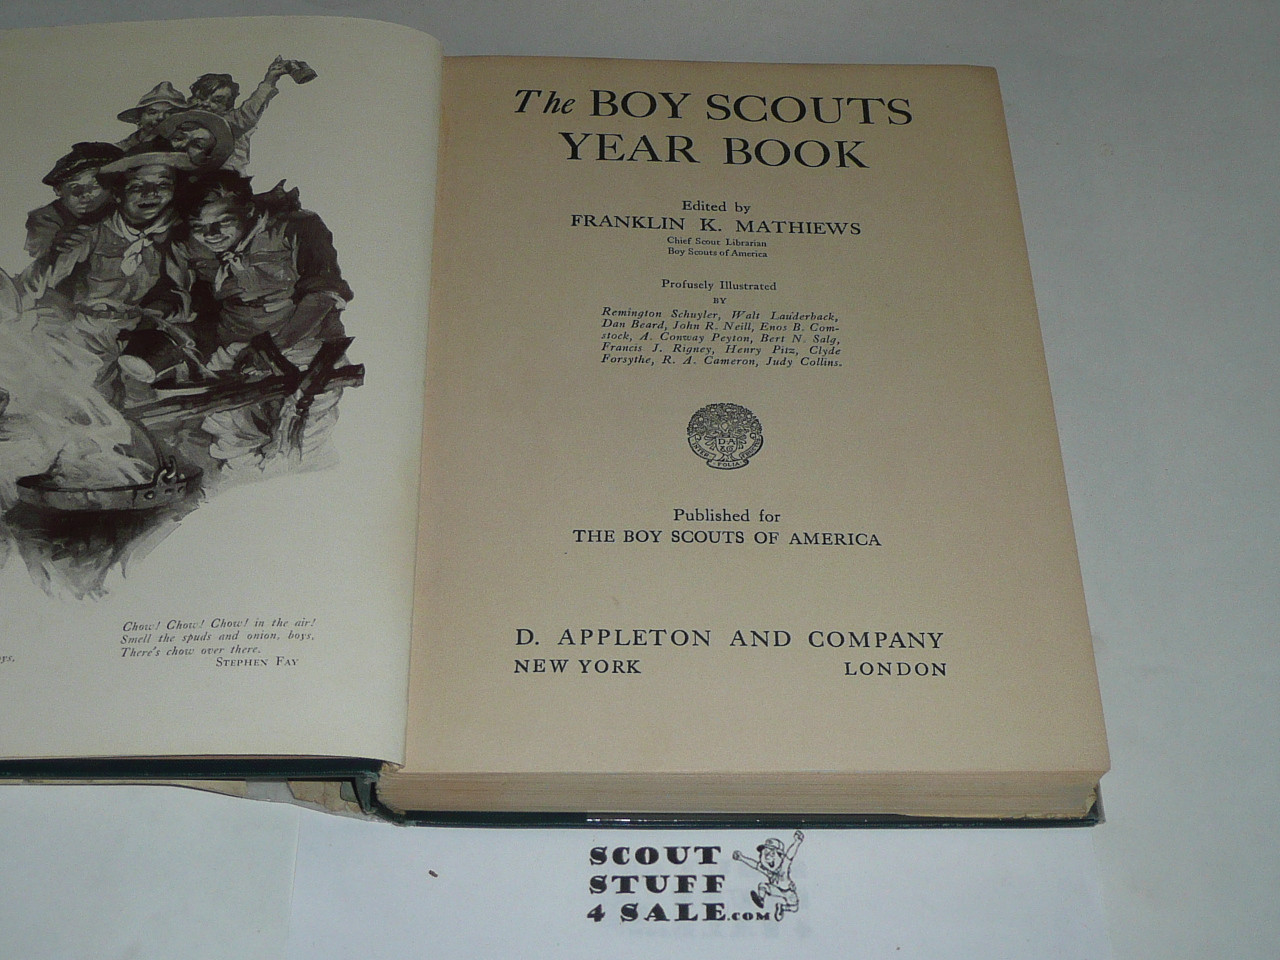 1926 The Boy Scout Year Book, by Frank Mathiews, MINT book with the dust jacket